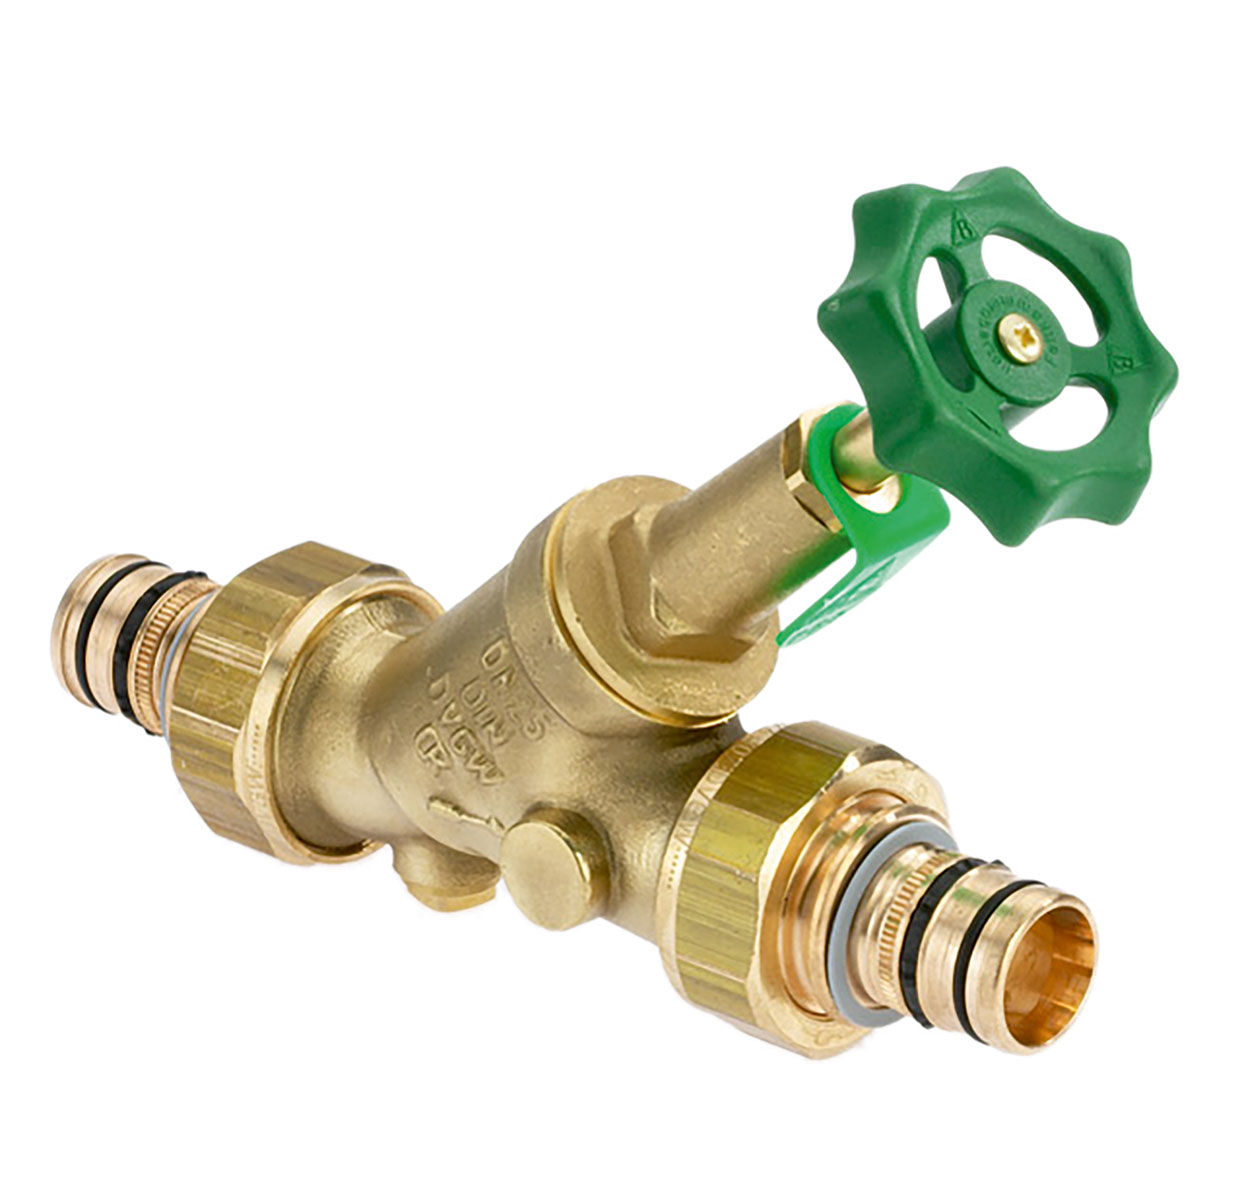 1636220 - CR-Brass Combined Free-flow and Backflow-preventer Valve Geberit Mepla, rising, without drain valve